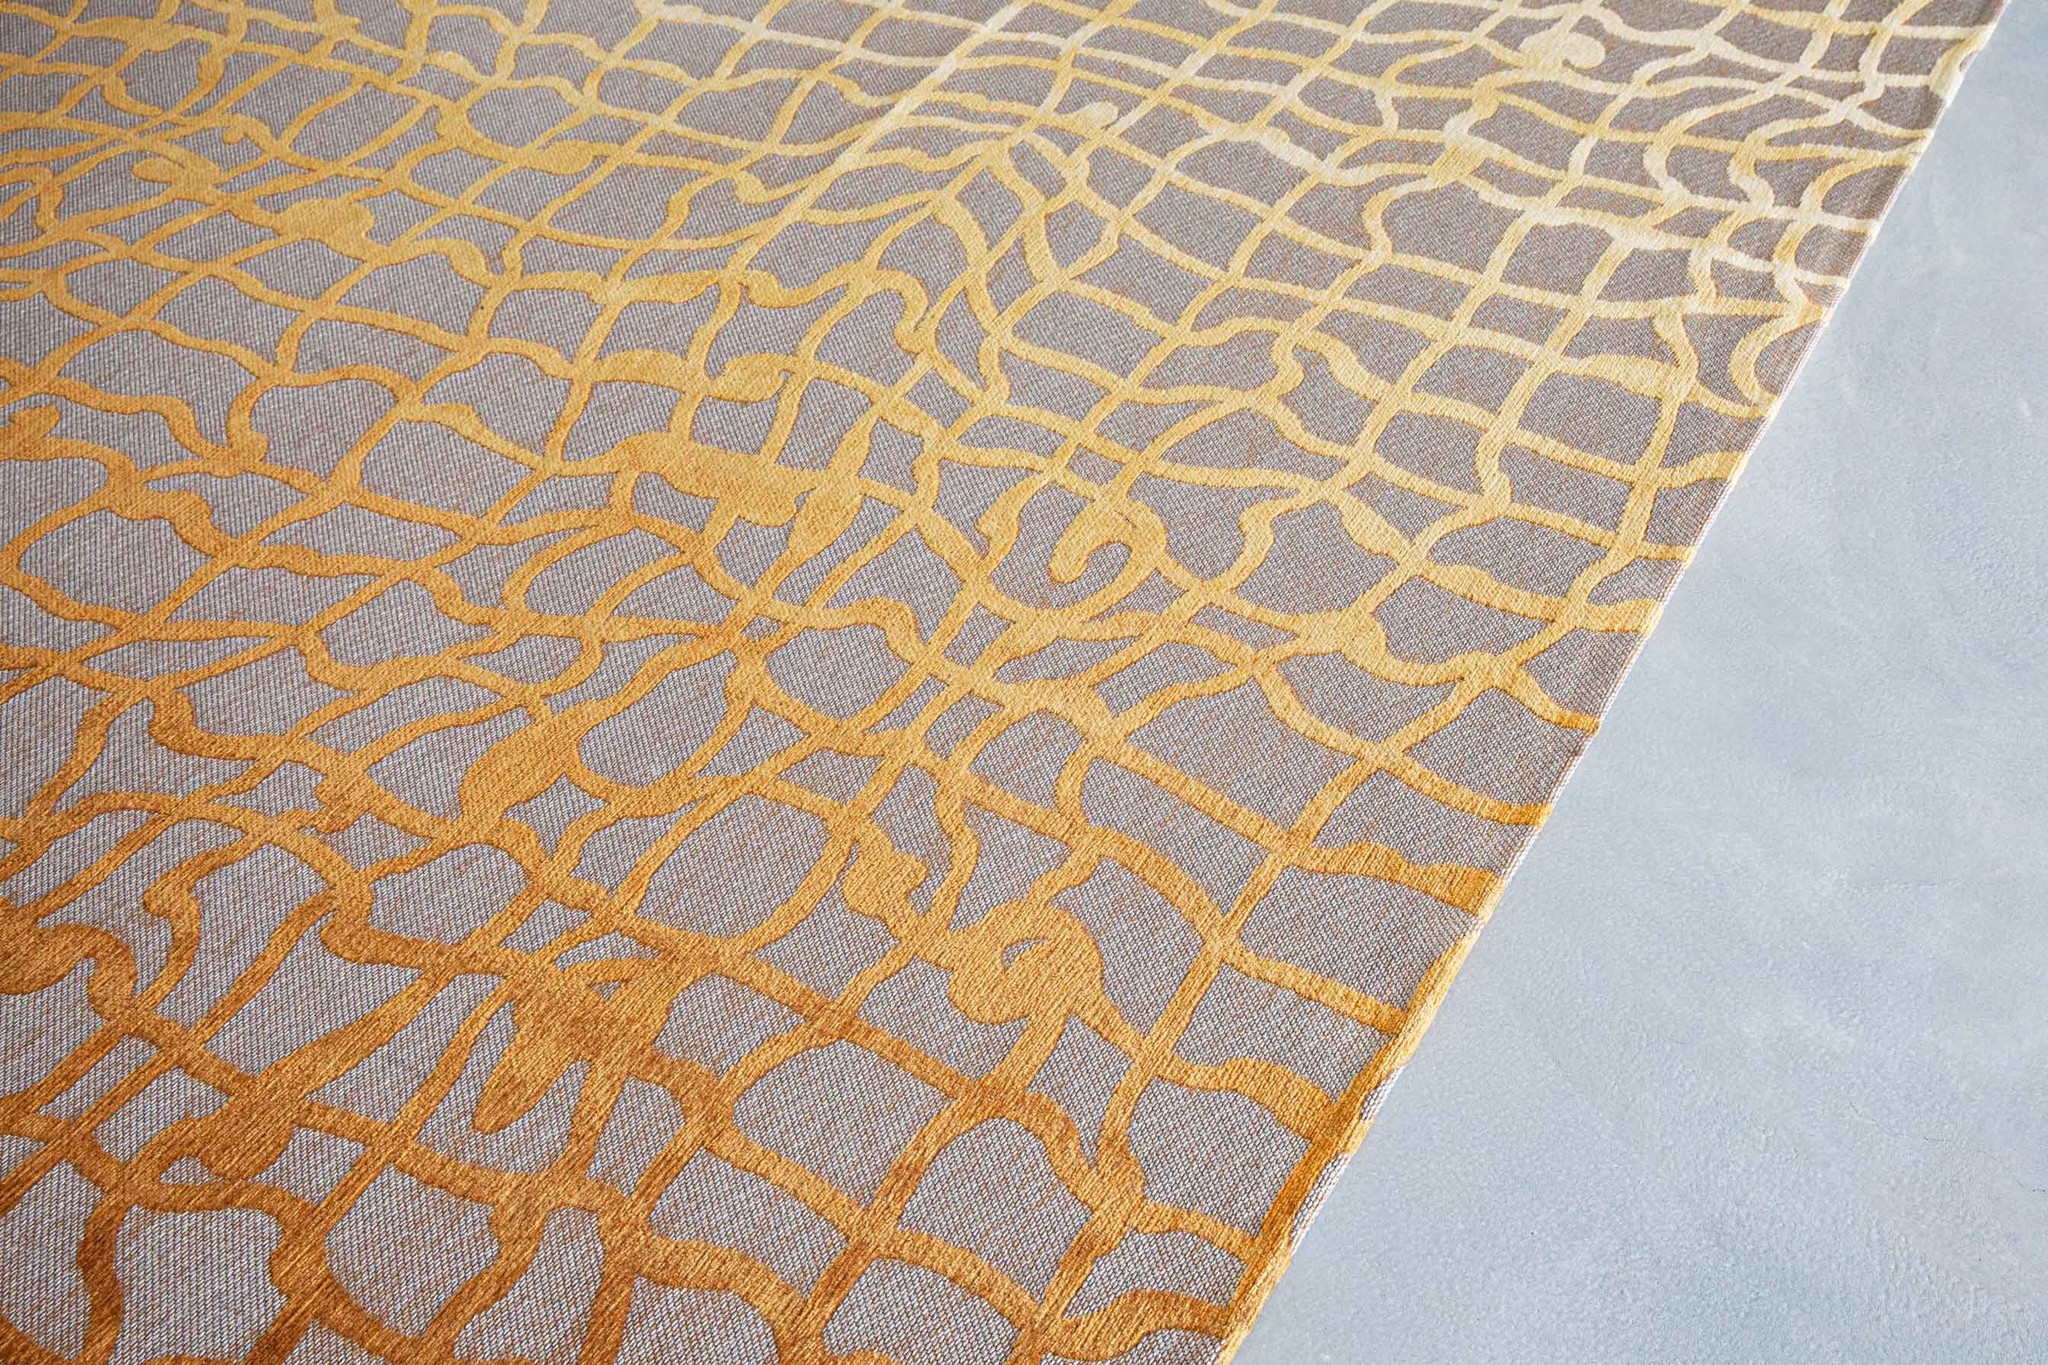 Abstract Gold Flatwoven Rug ☞ Size: 80 x 150 cm